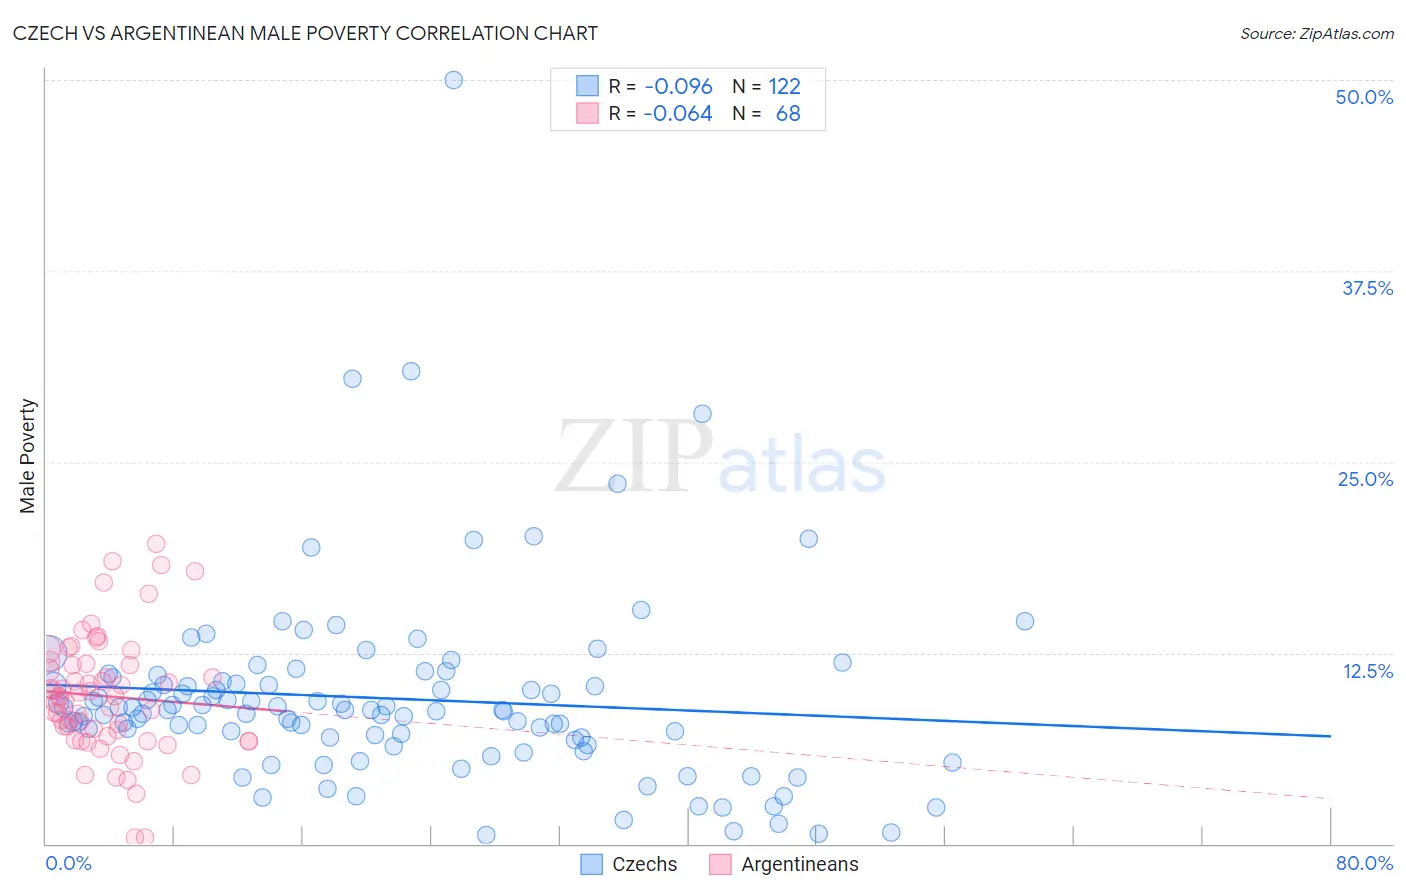 Czech vs Argentinean Male Poverty